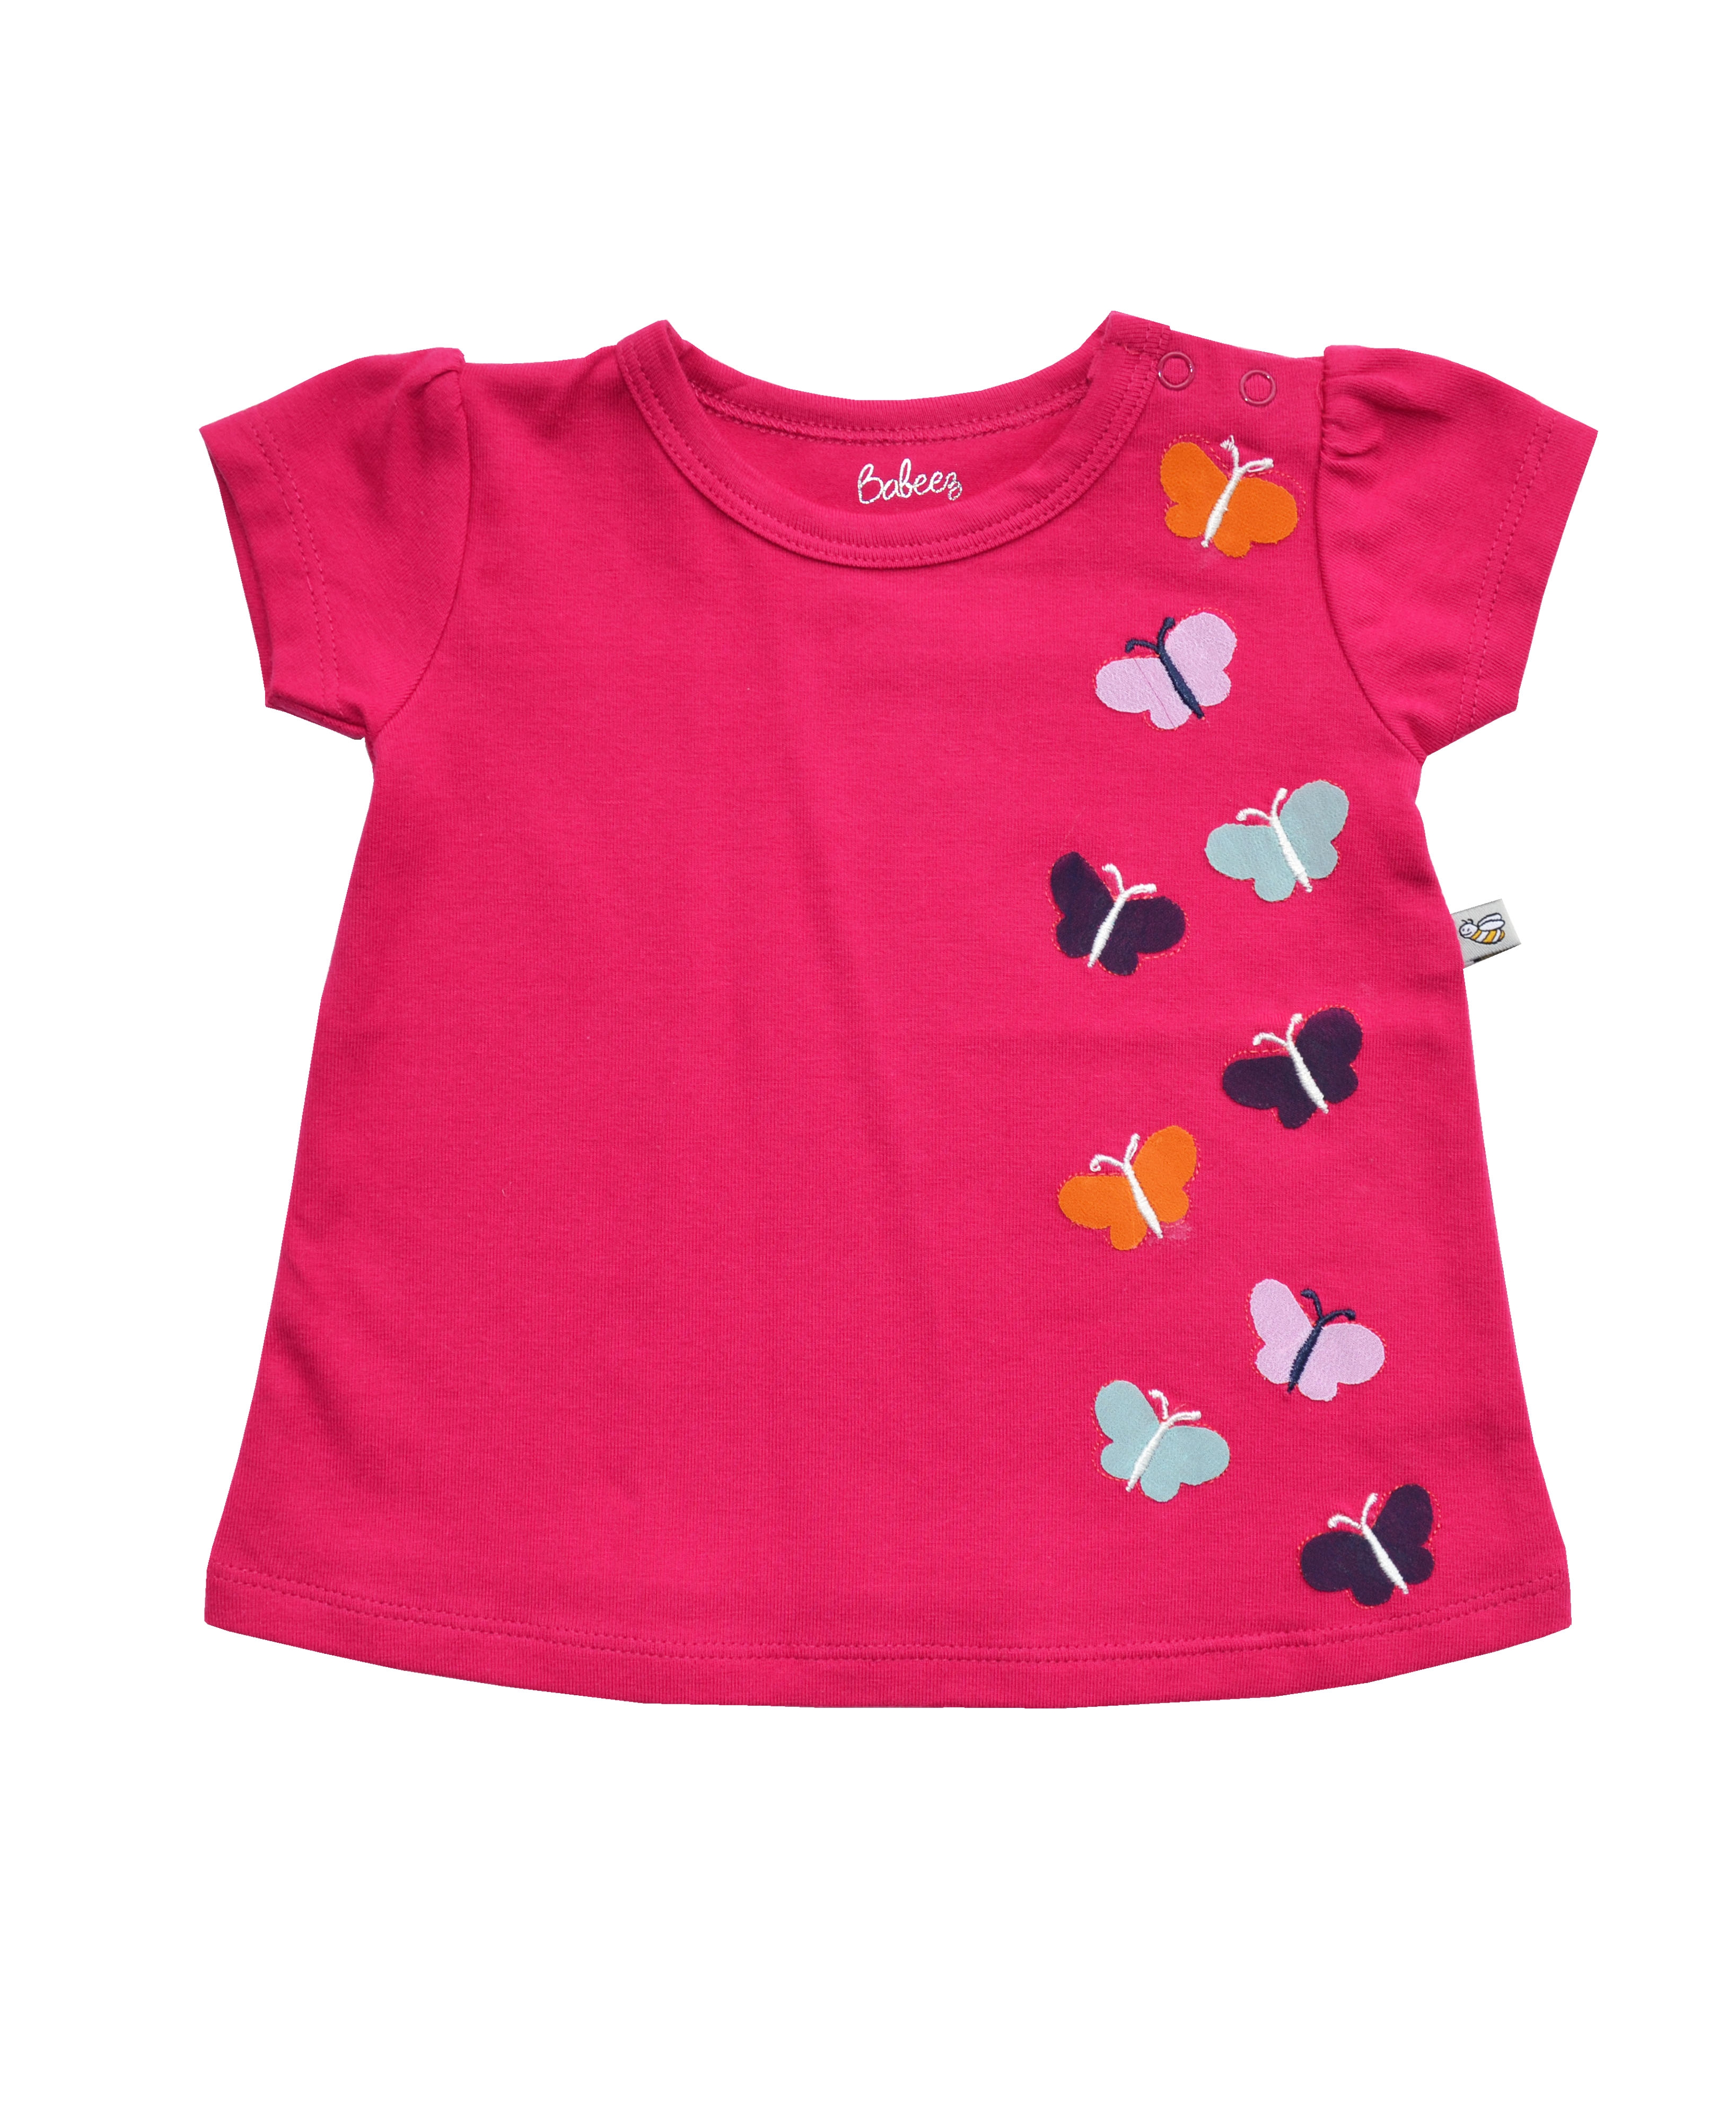 Butterfly Applique on Pink Short Sleeves Top ( 95% Cottton 5% Elasthan Jersey)